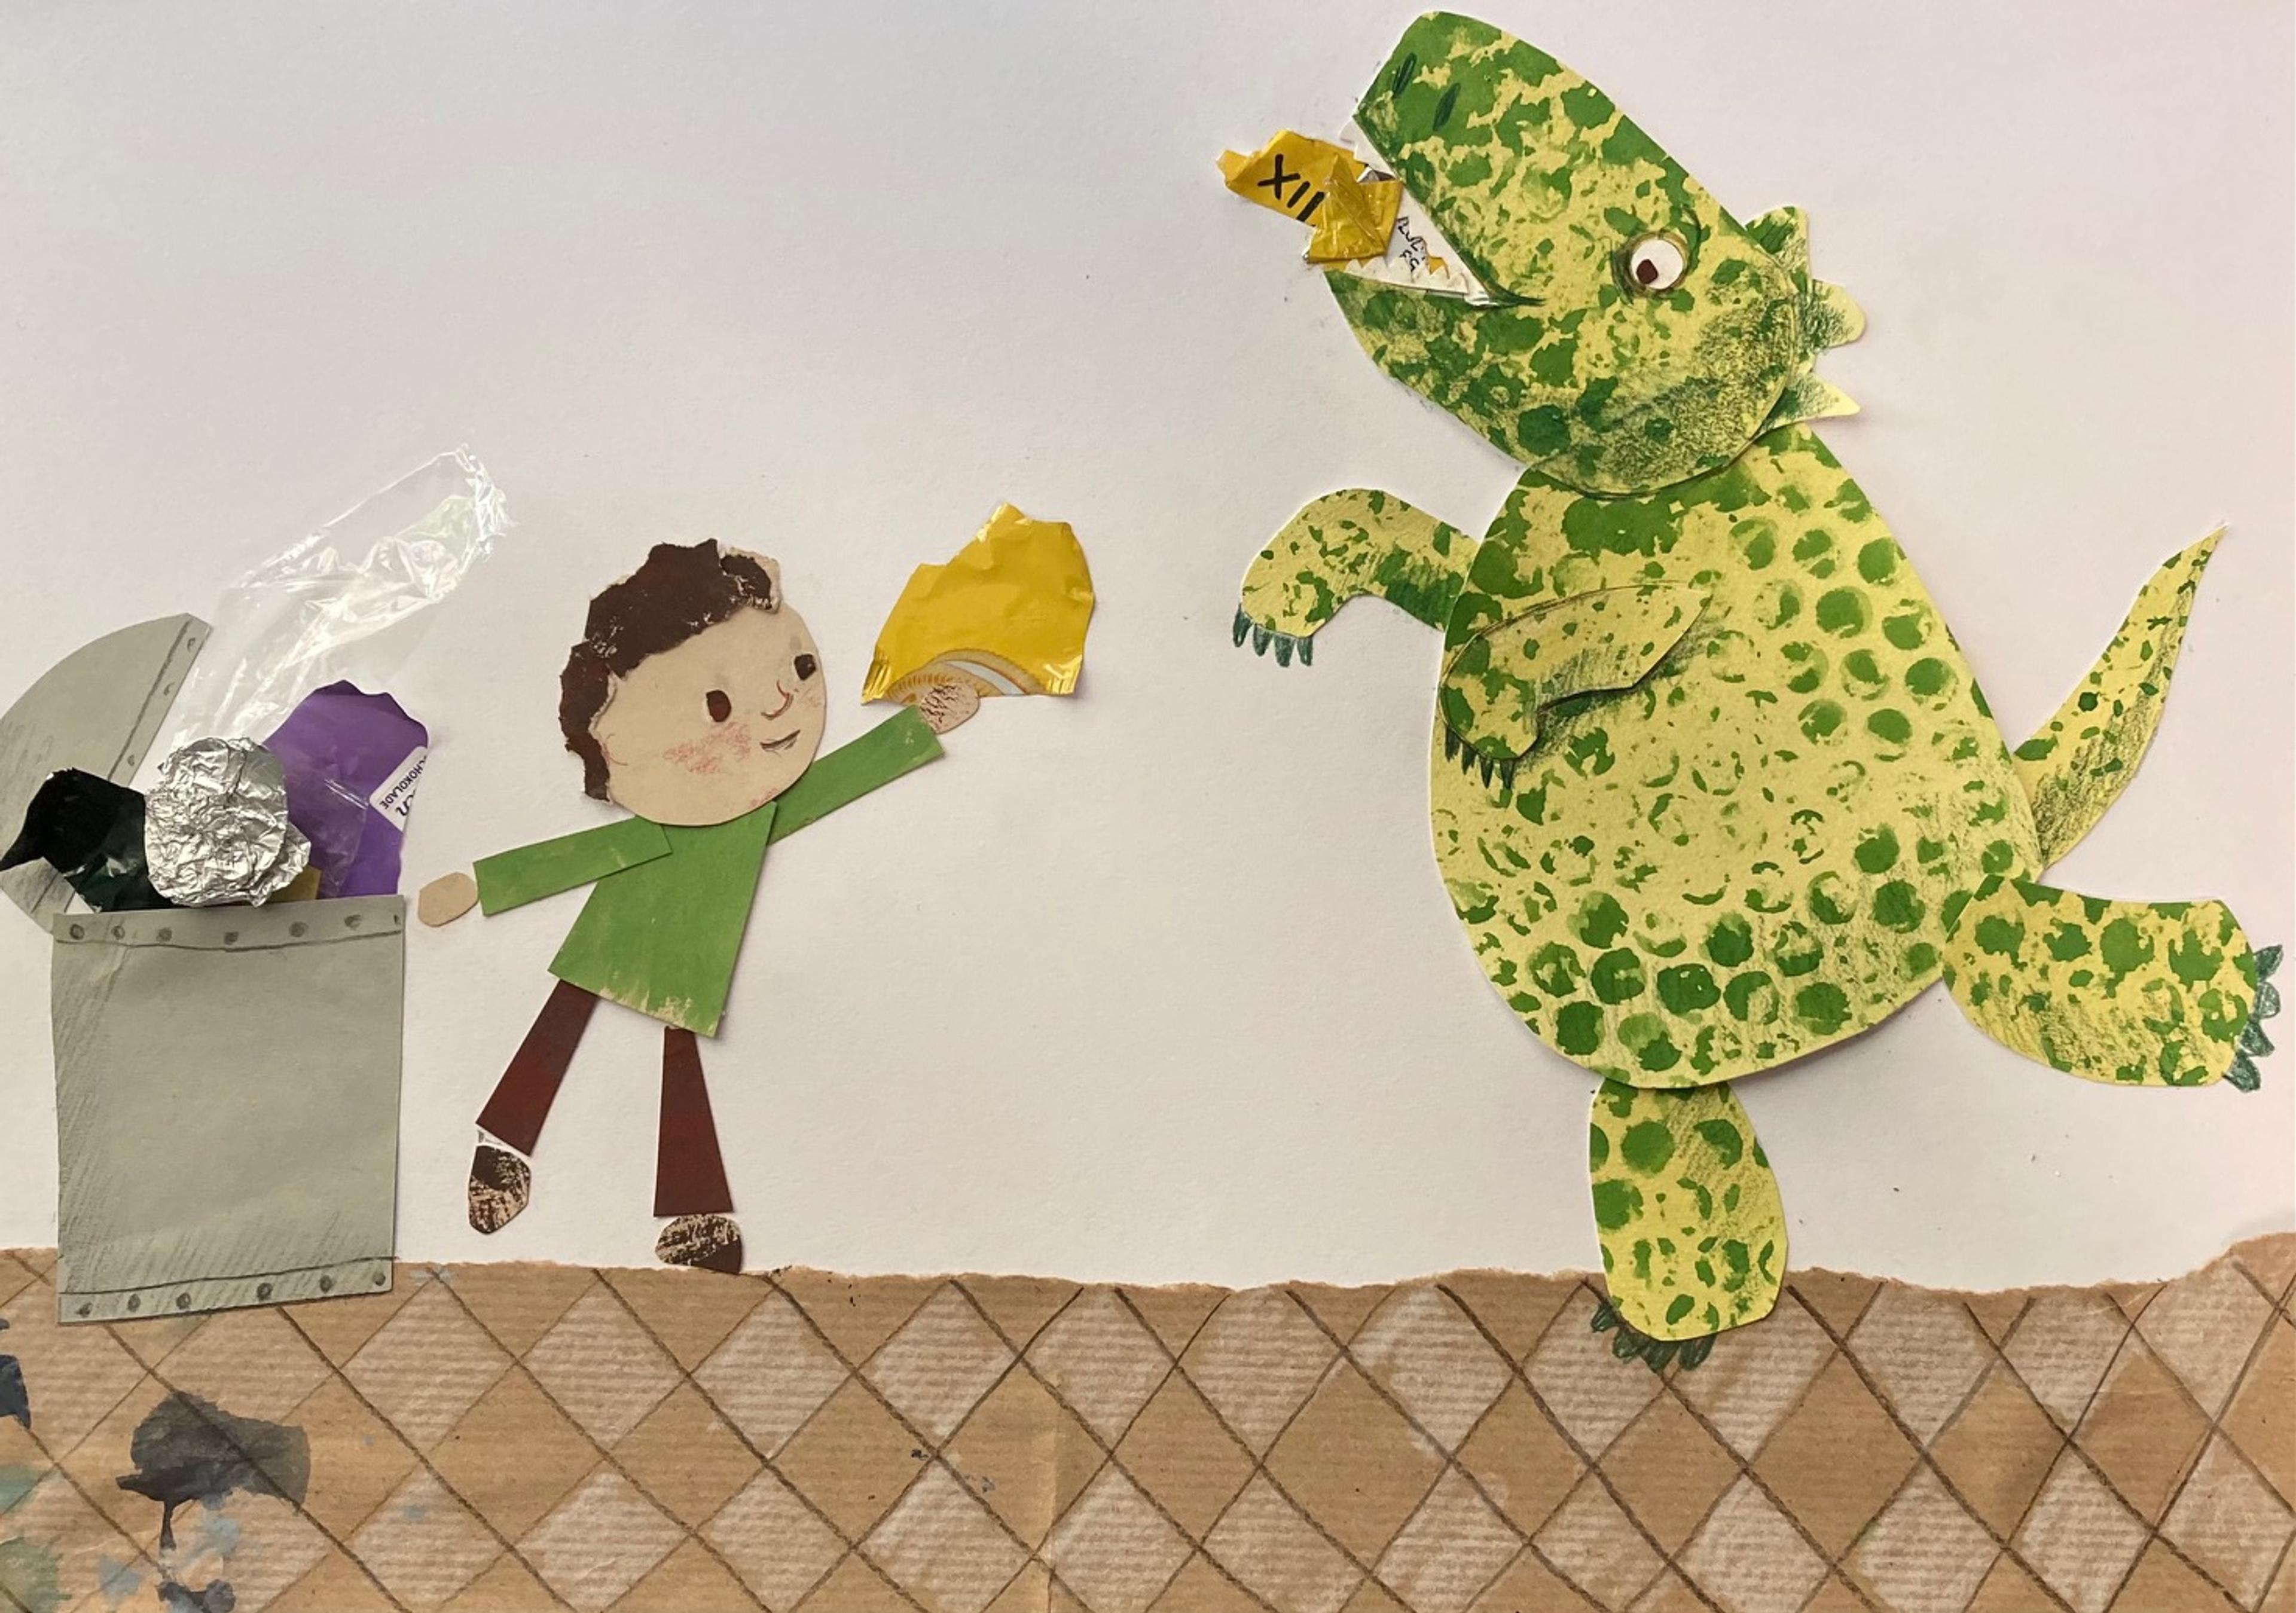 Collage of a child recycling by feeding plastic to a dinosaur.